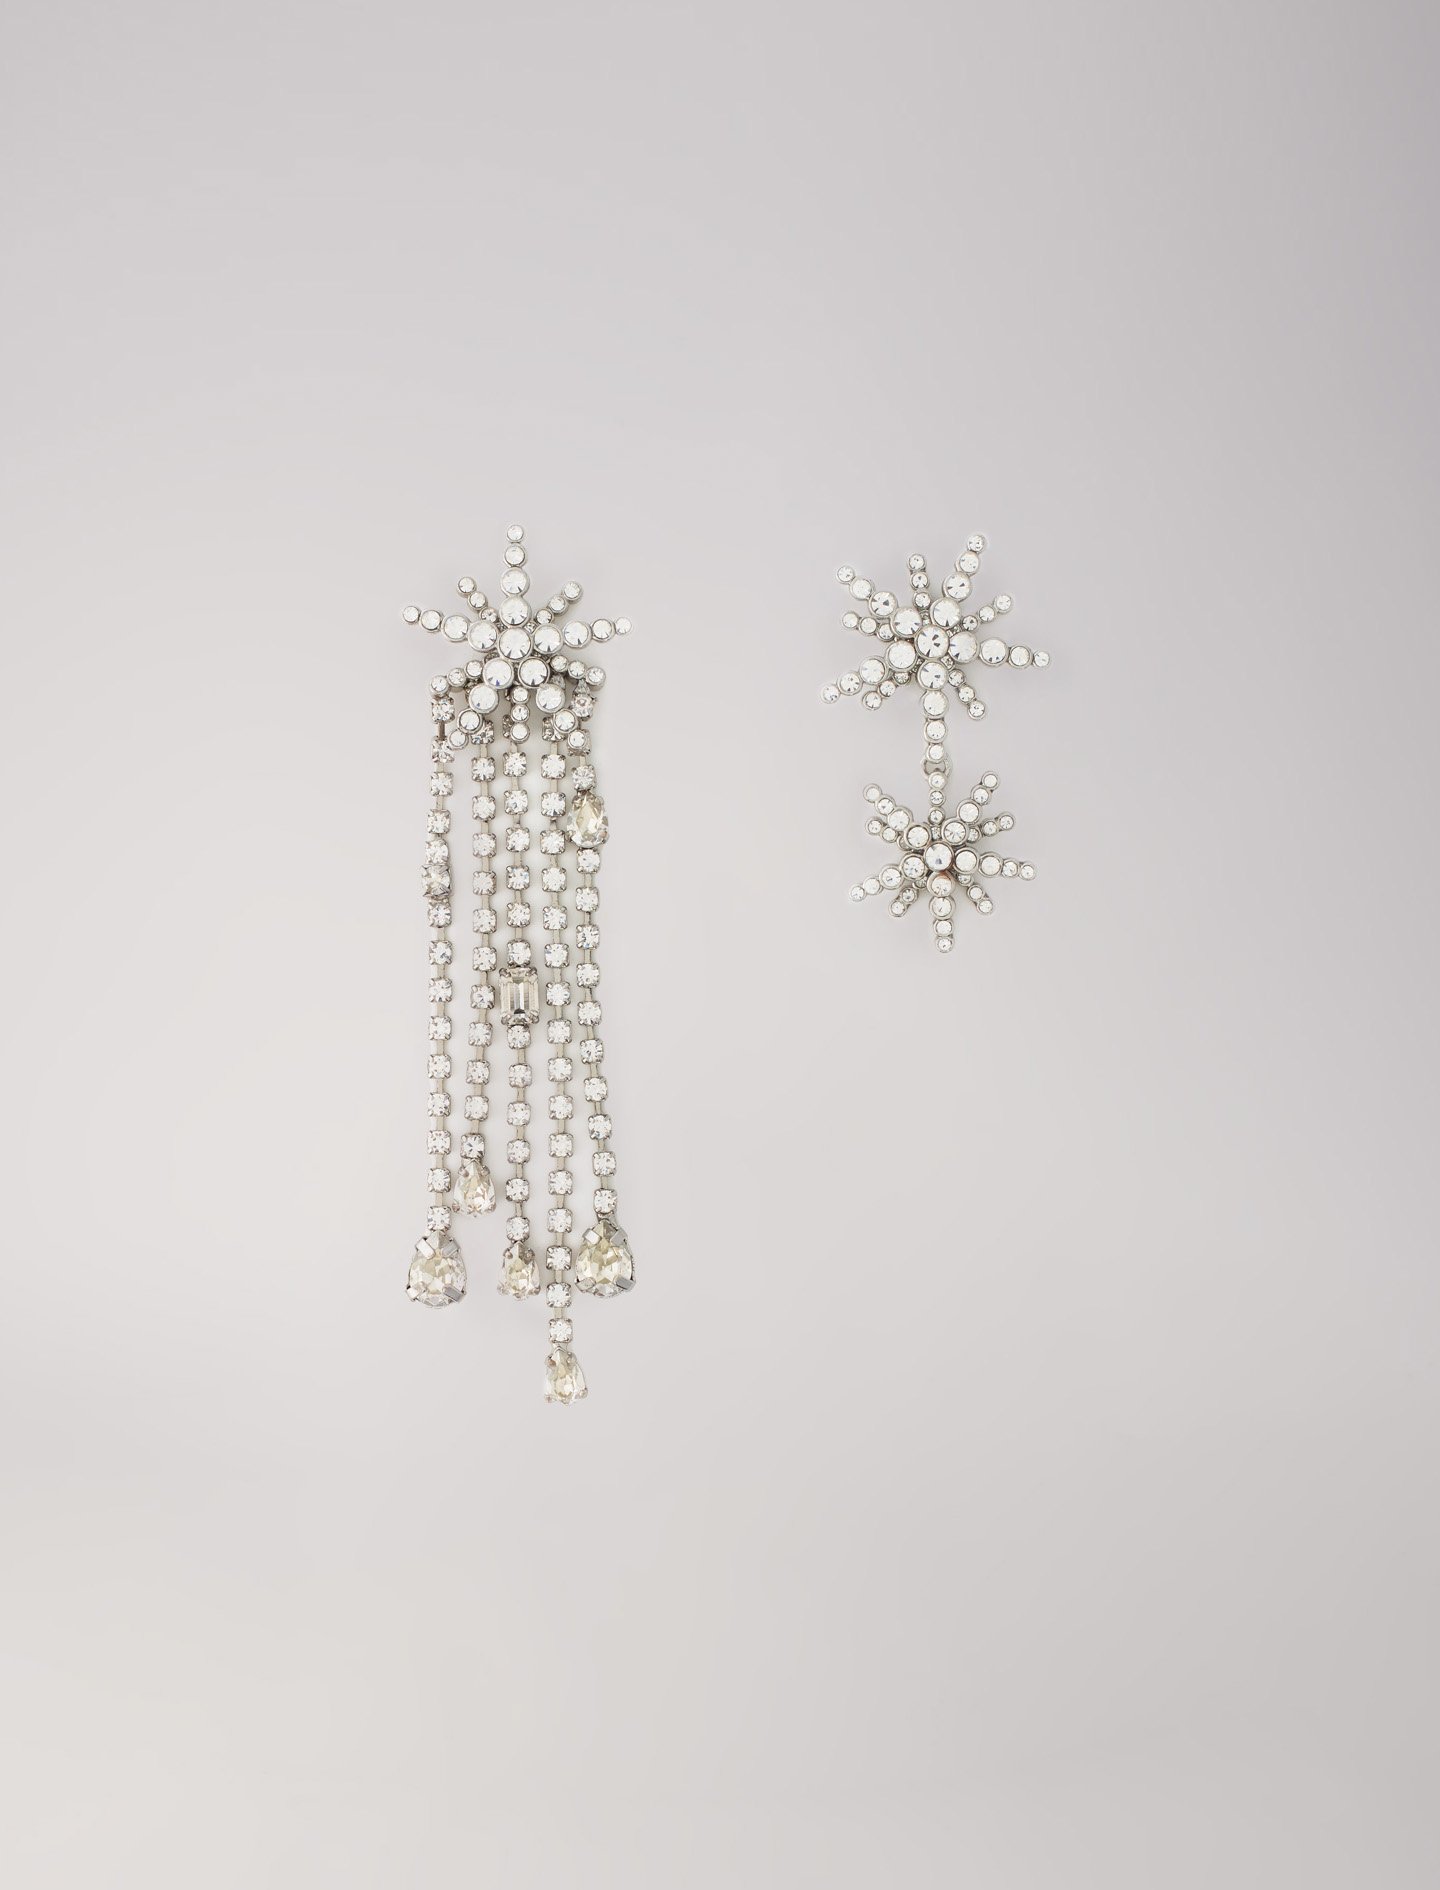 Mixte's glass Jewellery: Star strass-earings for Spring/Summer, size Mixte-Jewelry-OS (ONE SIZE), in color Crystal / White